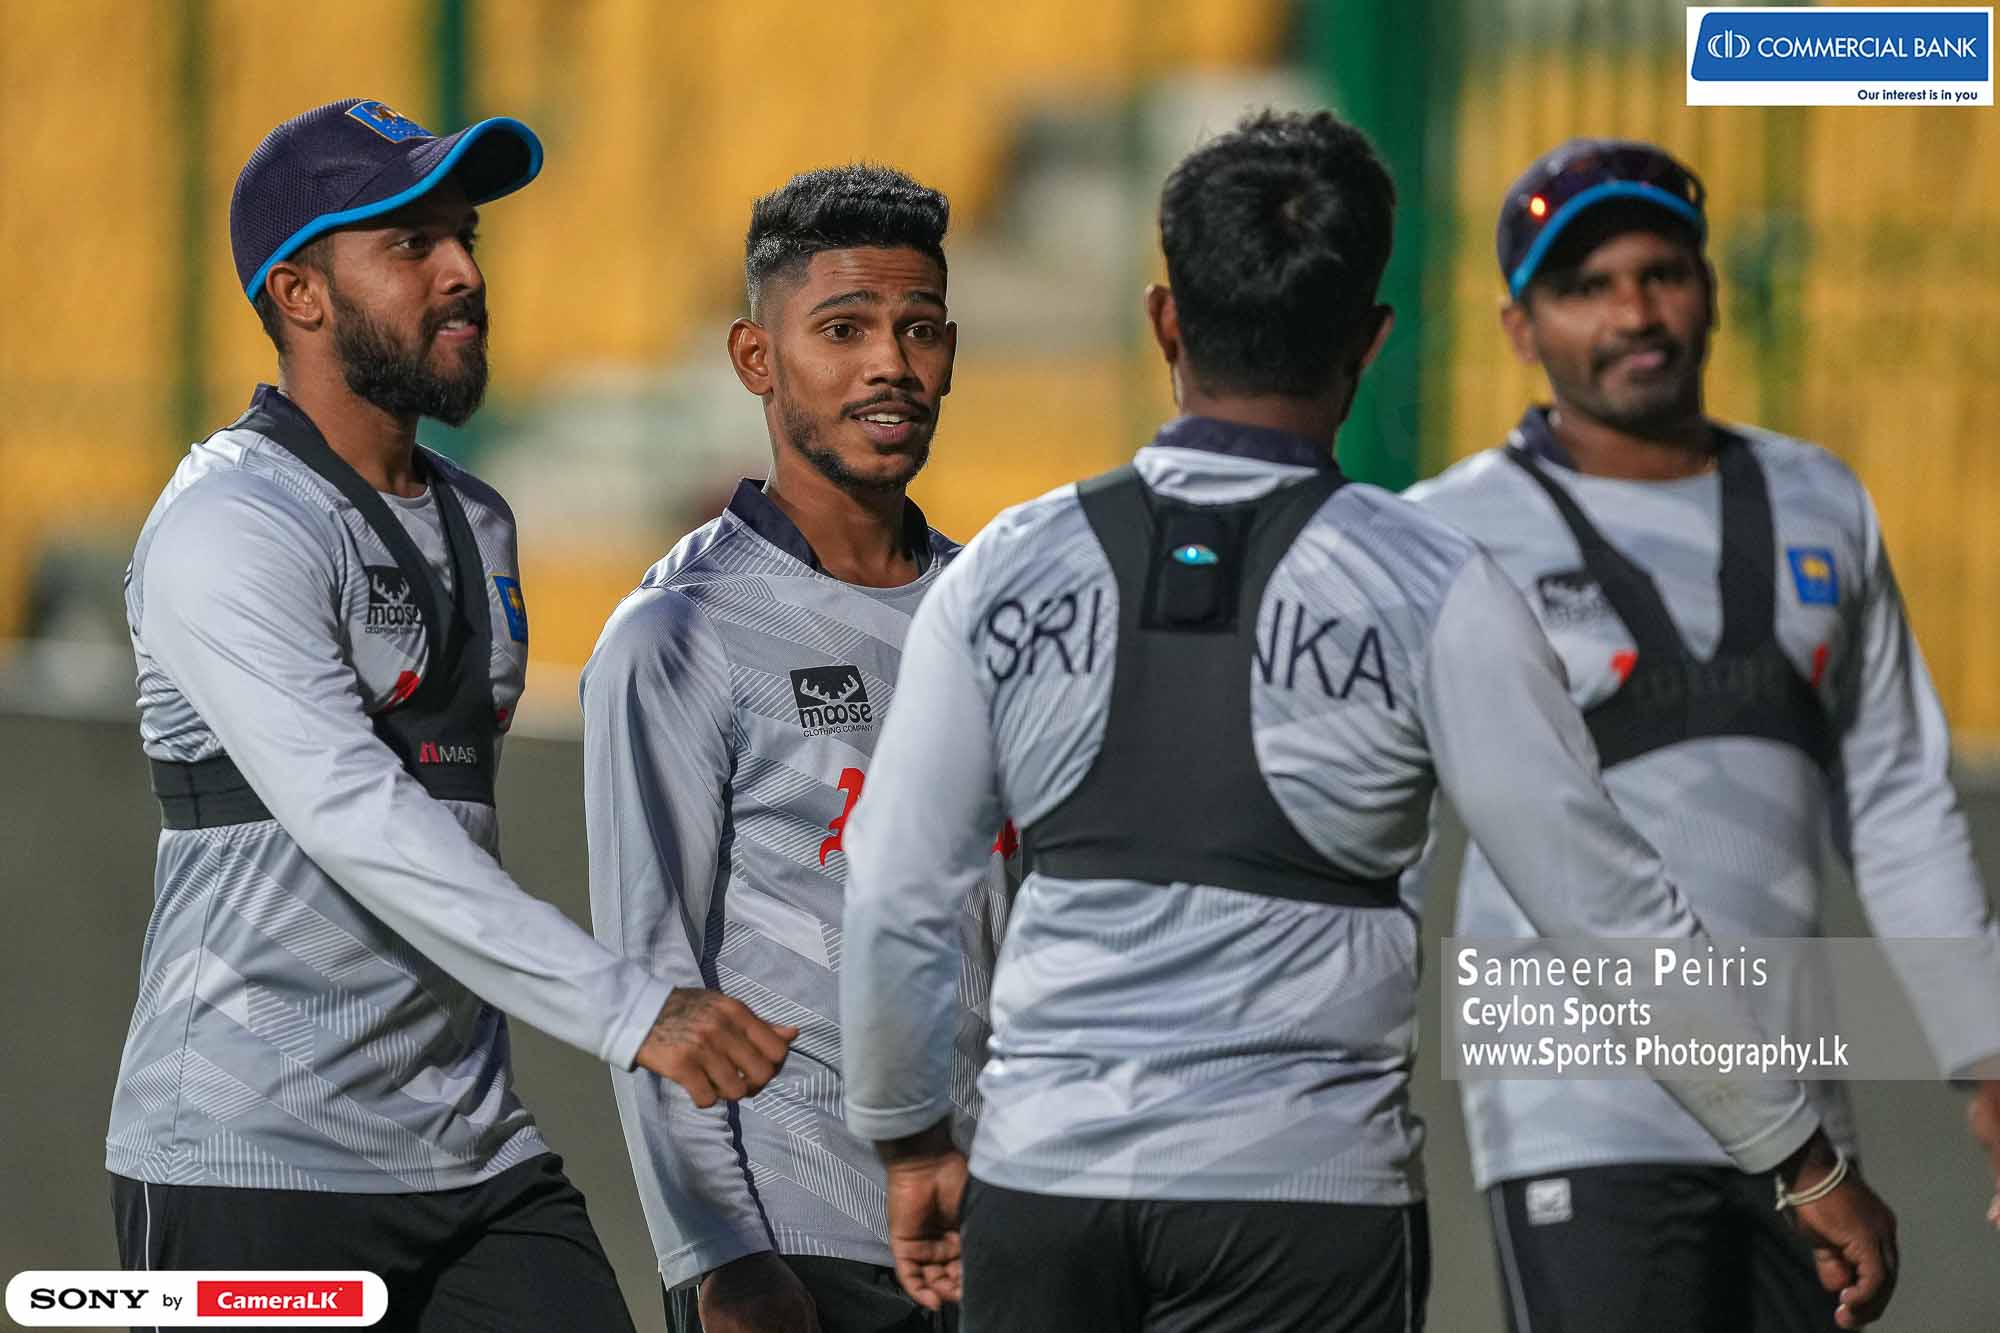 Sri Lanka’s first Practice Session in Bangalore ahead of the England match